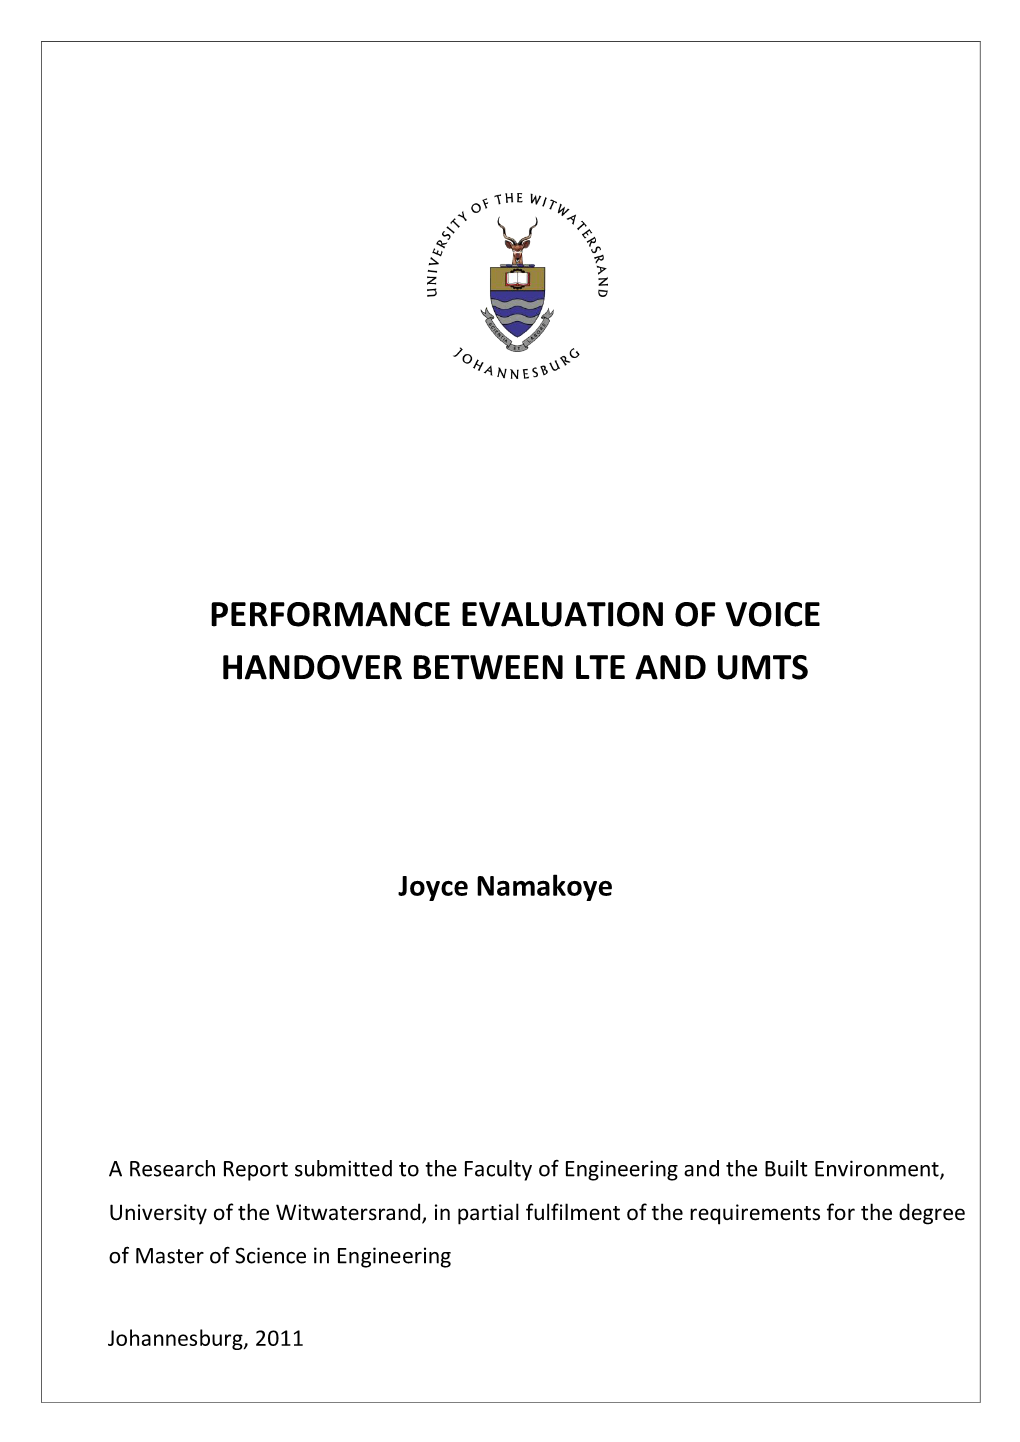 Performance Evaluation of VOICE CALL HANDOVER BETWEEN